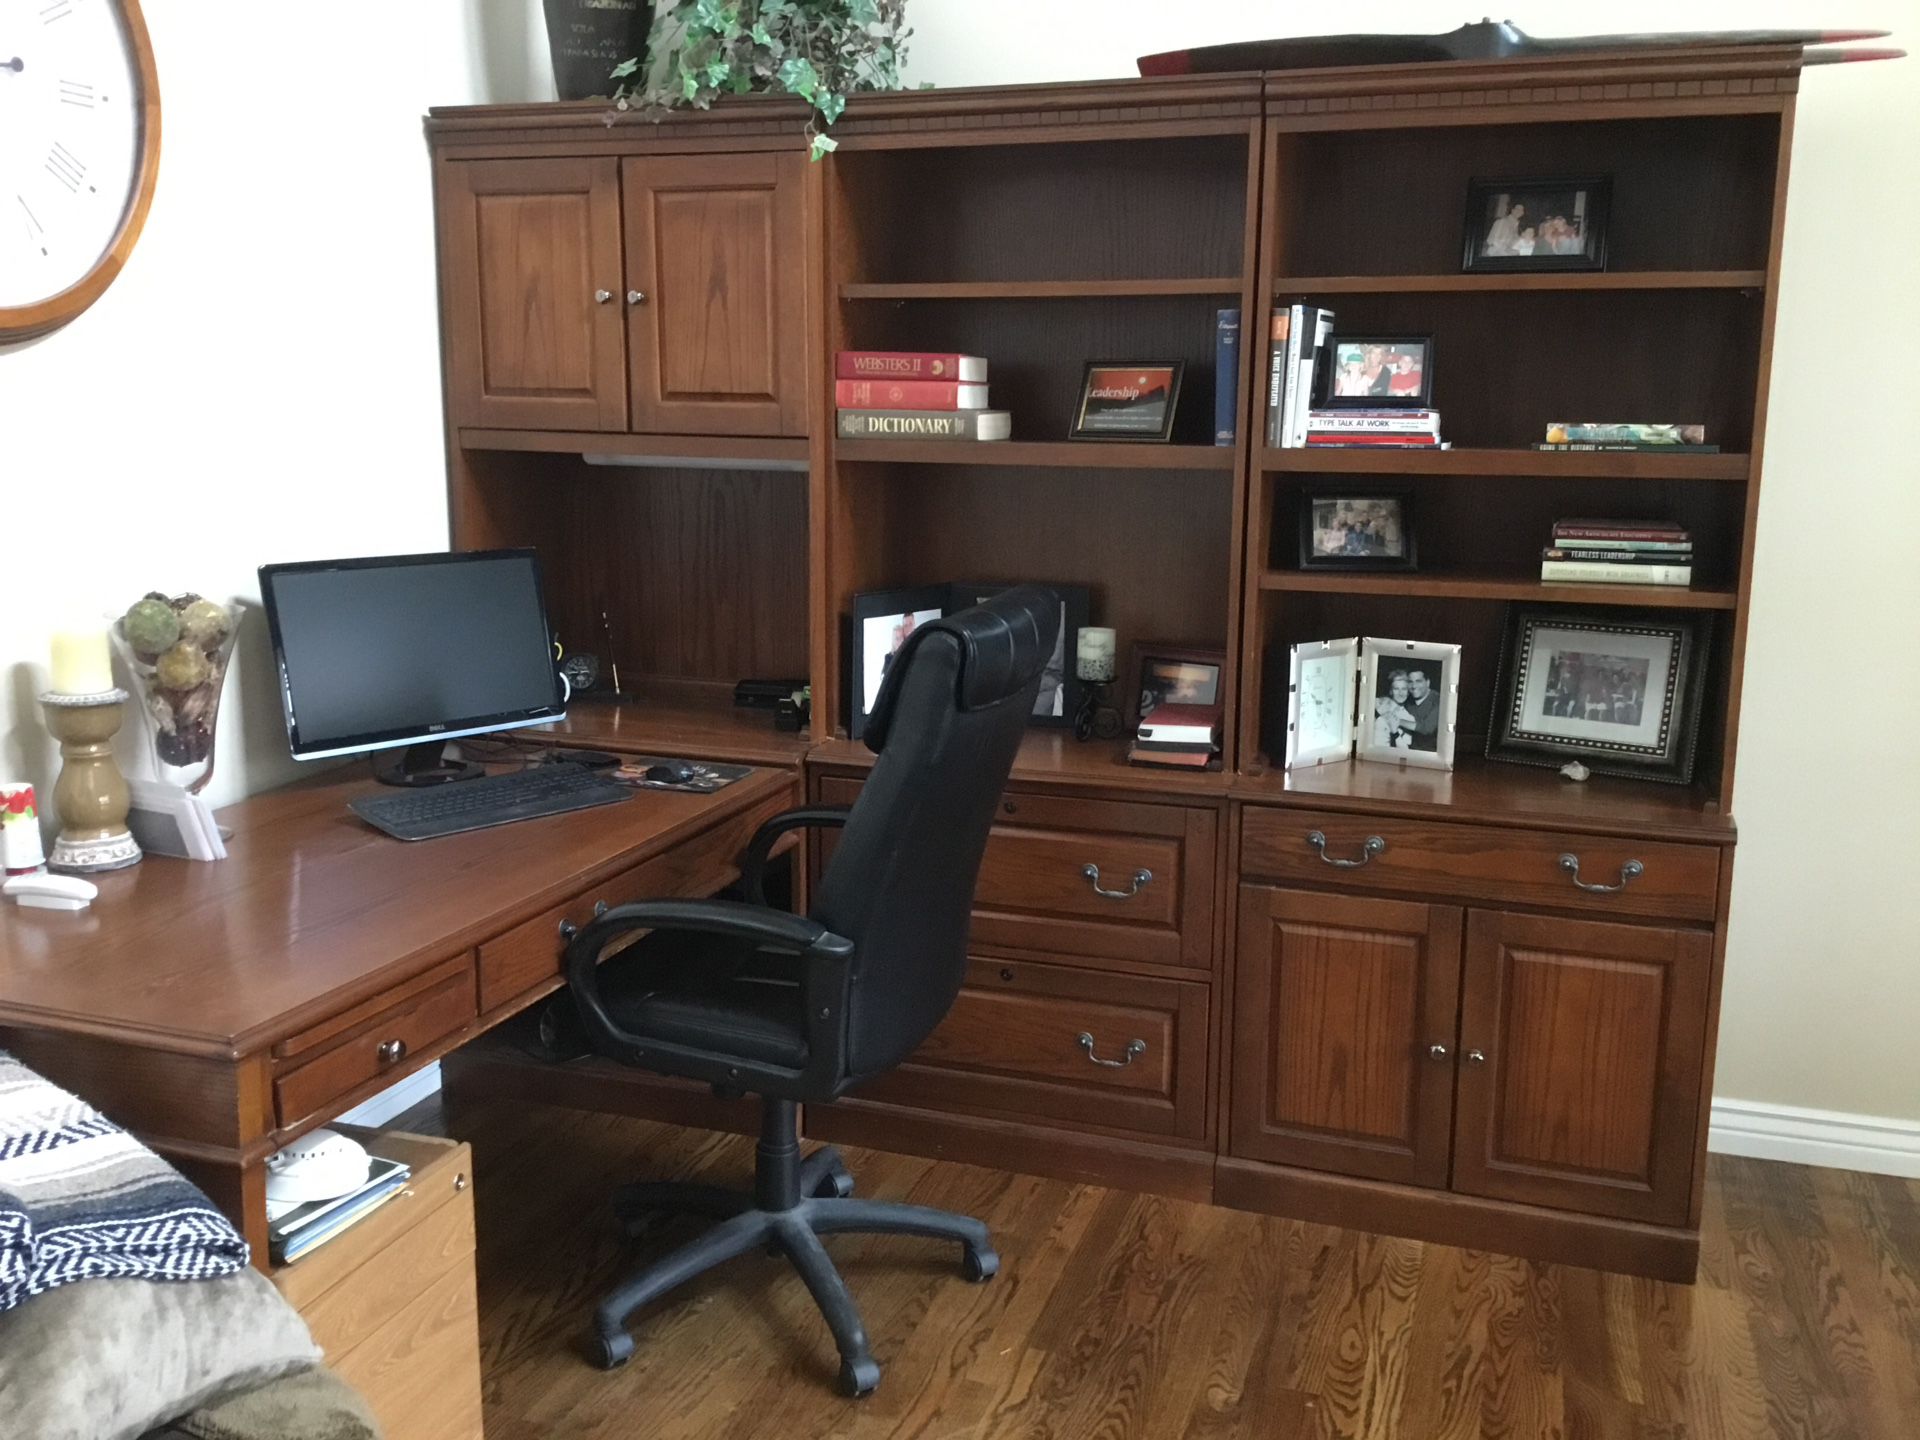 Office desk with 2 built in filing cabinet drawers and a fold out keyboard stand